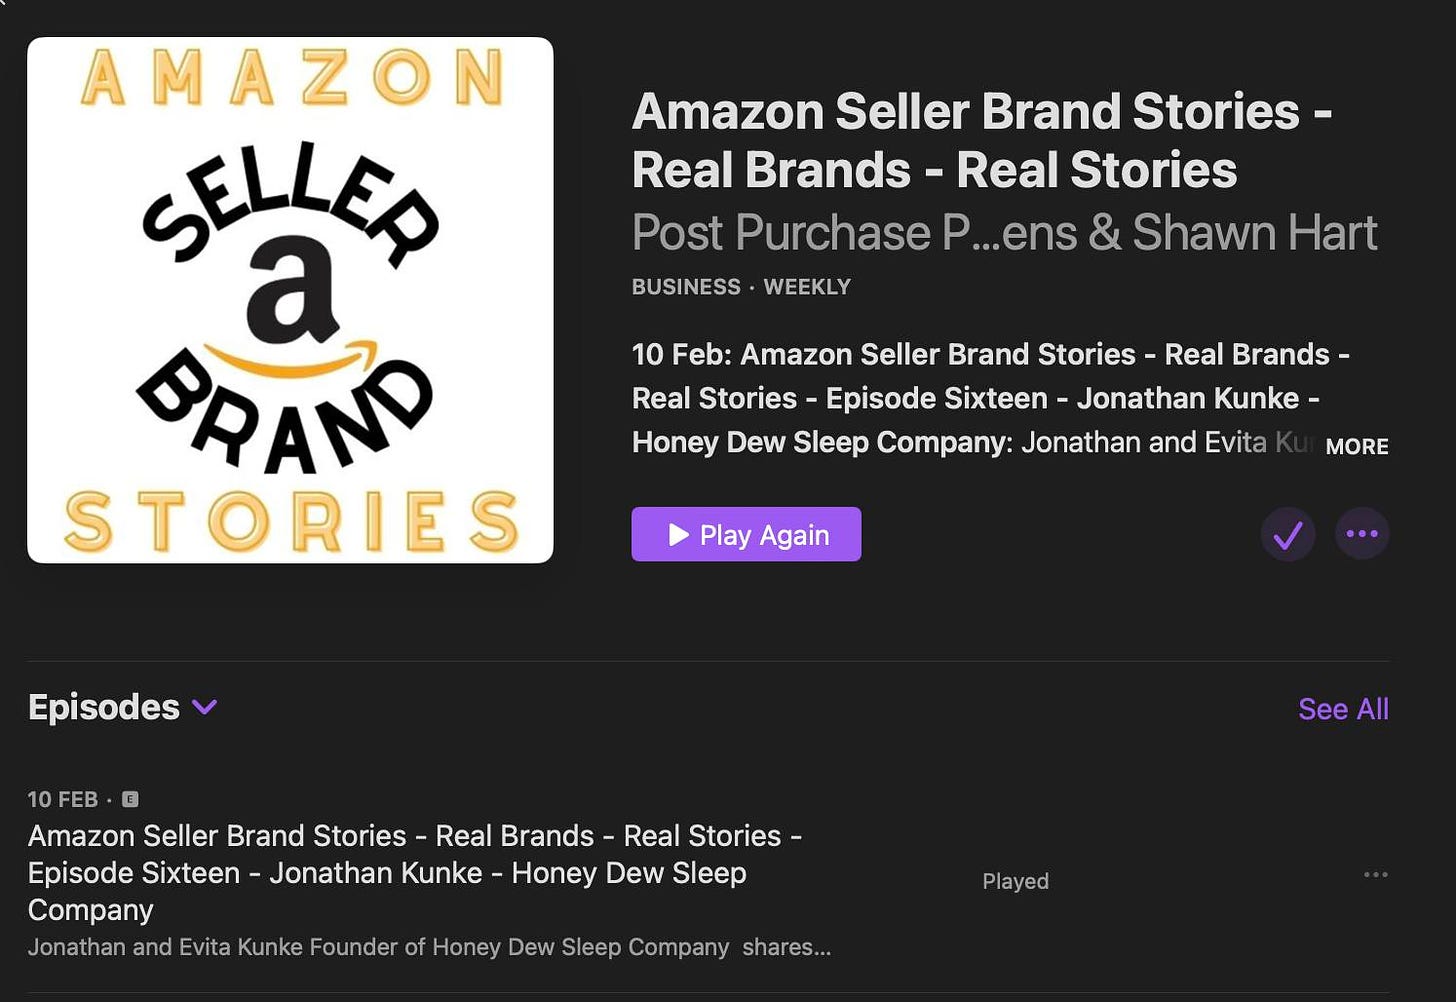 May be a graphic of text that says 'Amazon Seller Brand Stories- Real Brands Real Stories Post Purchase ...ens & Shawn Hart BUSINESS WEEKLY AMAZON SELLER BRAND STORIES 10 Feb: Amazon Seller Brand Stories Real Brands Real Stories Episode Sixteen Jonathan Kunke- Honey Dew Sleep Company: Jonathan and Evita Play Again MORE Episodes OFEB Amazon Seller Brand Stories Real Brands Real Stories- Episode Sixteen Jonathan Kunke Honey Dew Sleep Company Jonathan and Evita Kunke Founder of Honey Dew Sleep Company shares... SeeAll See Played'